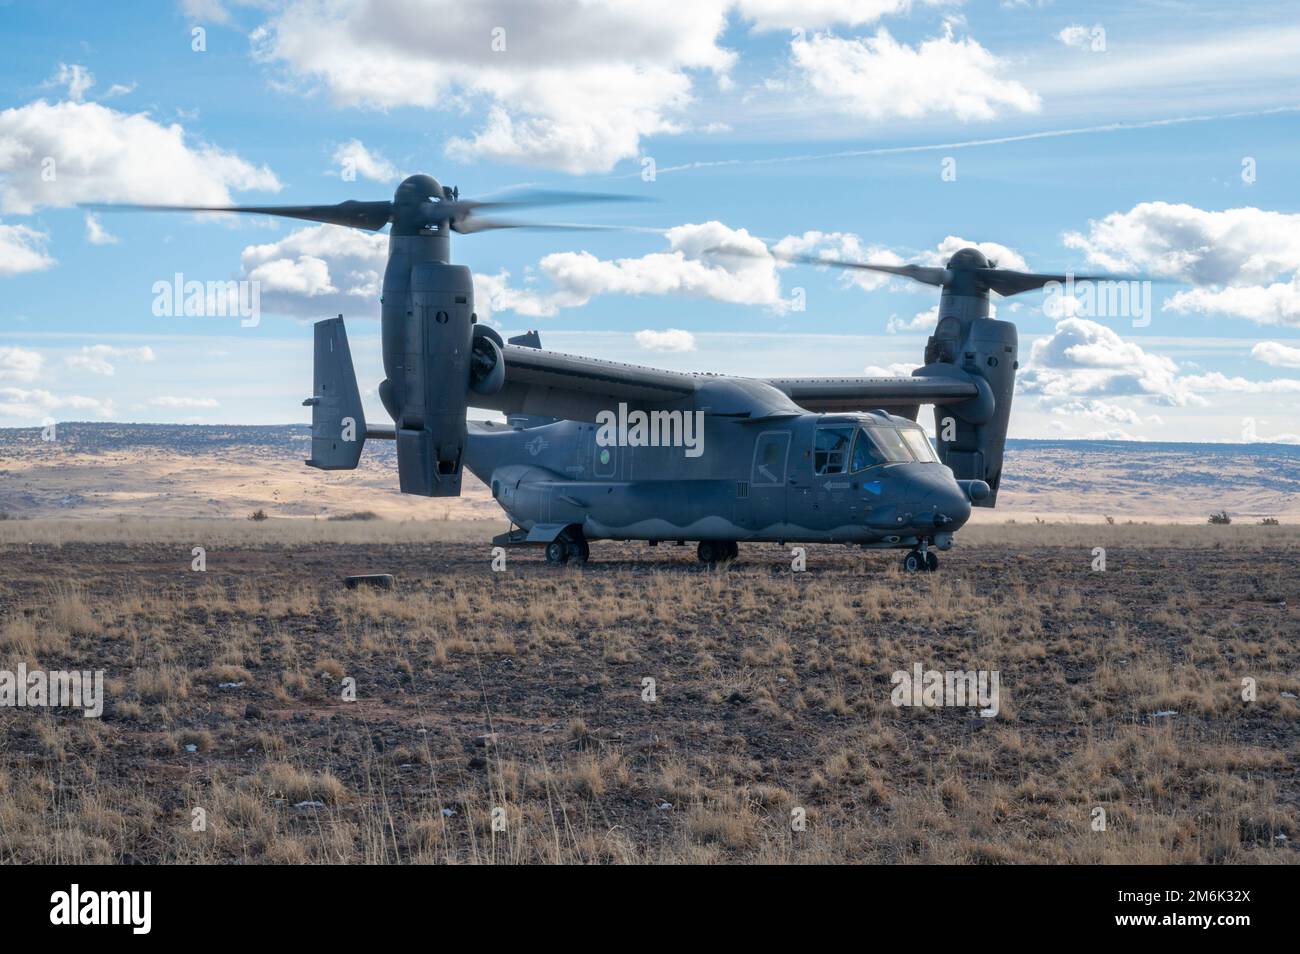 A CV-22 Osprey from the 71st Special Operations Squadron prepares to take flight from a designated landing zone in Albuquerque, New Mexico, December 29, 2022. The 71st SOS regularly conducts training flights as part of their mission to train warriors, professionalize Airmen, and employ airpower. (U.S. Air Force photo by A1C Ruben Garibay) Stock Photo